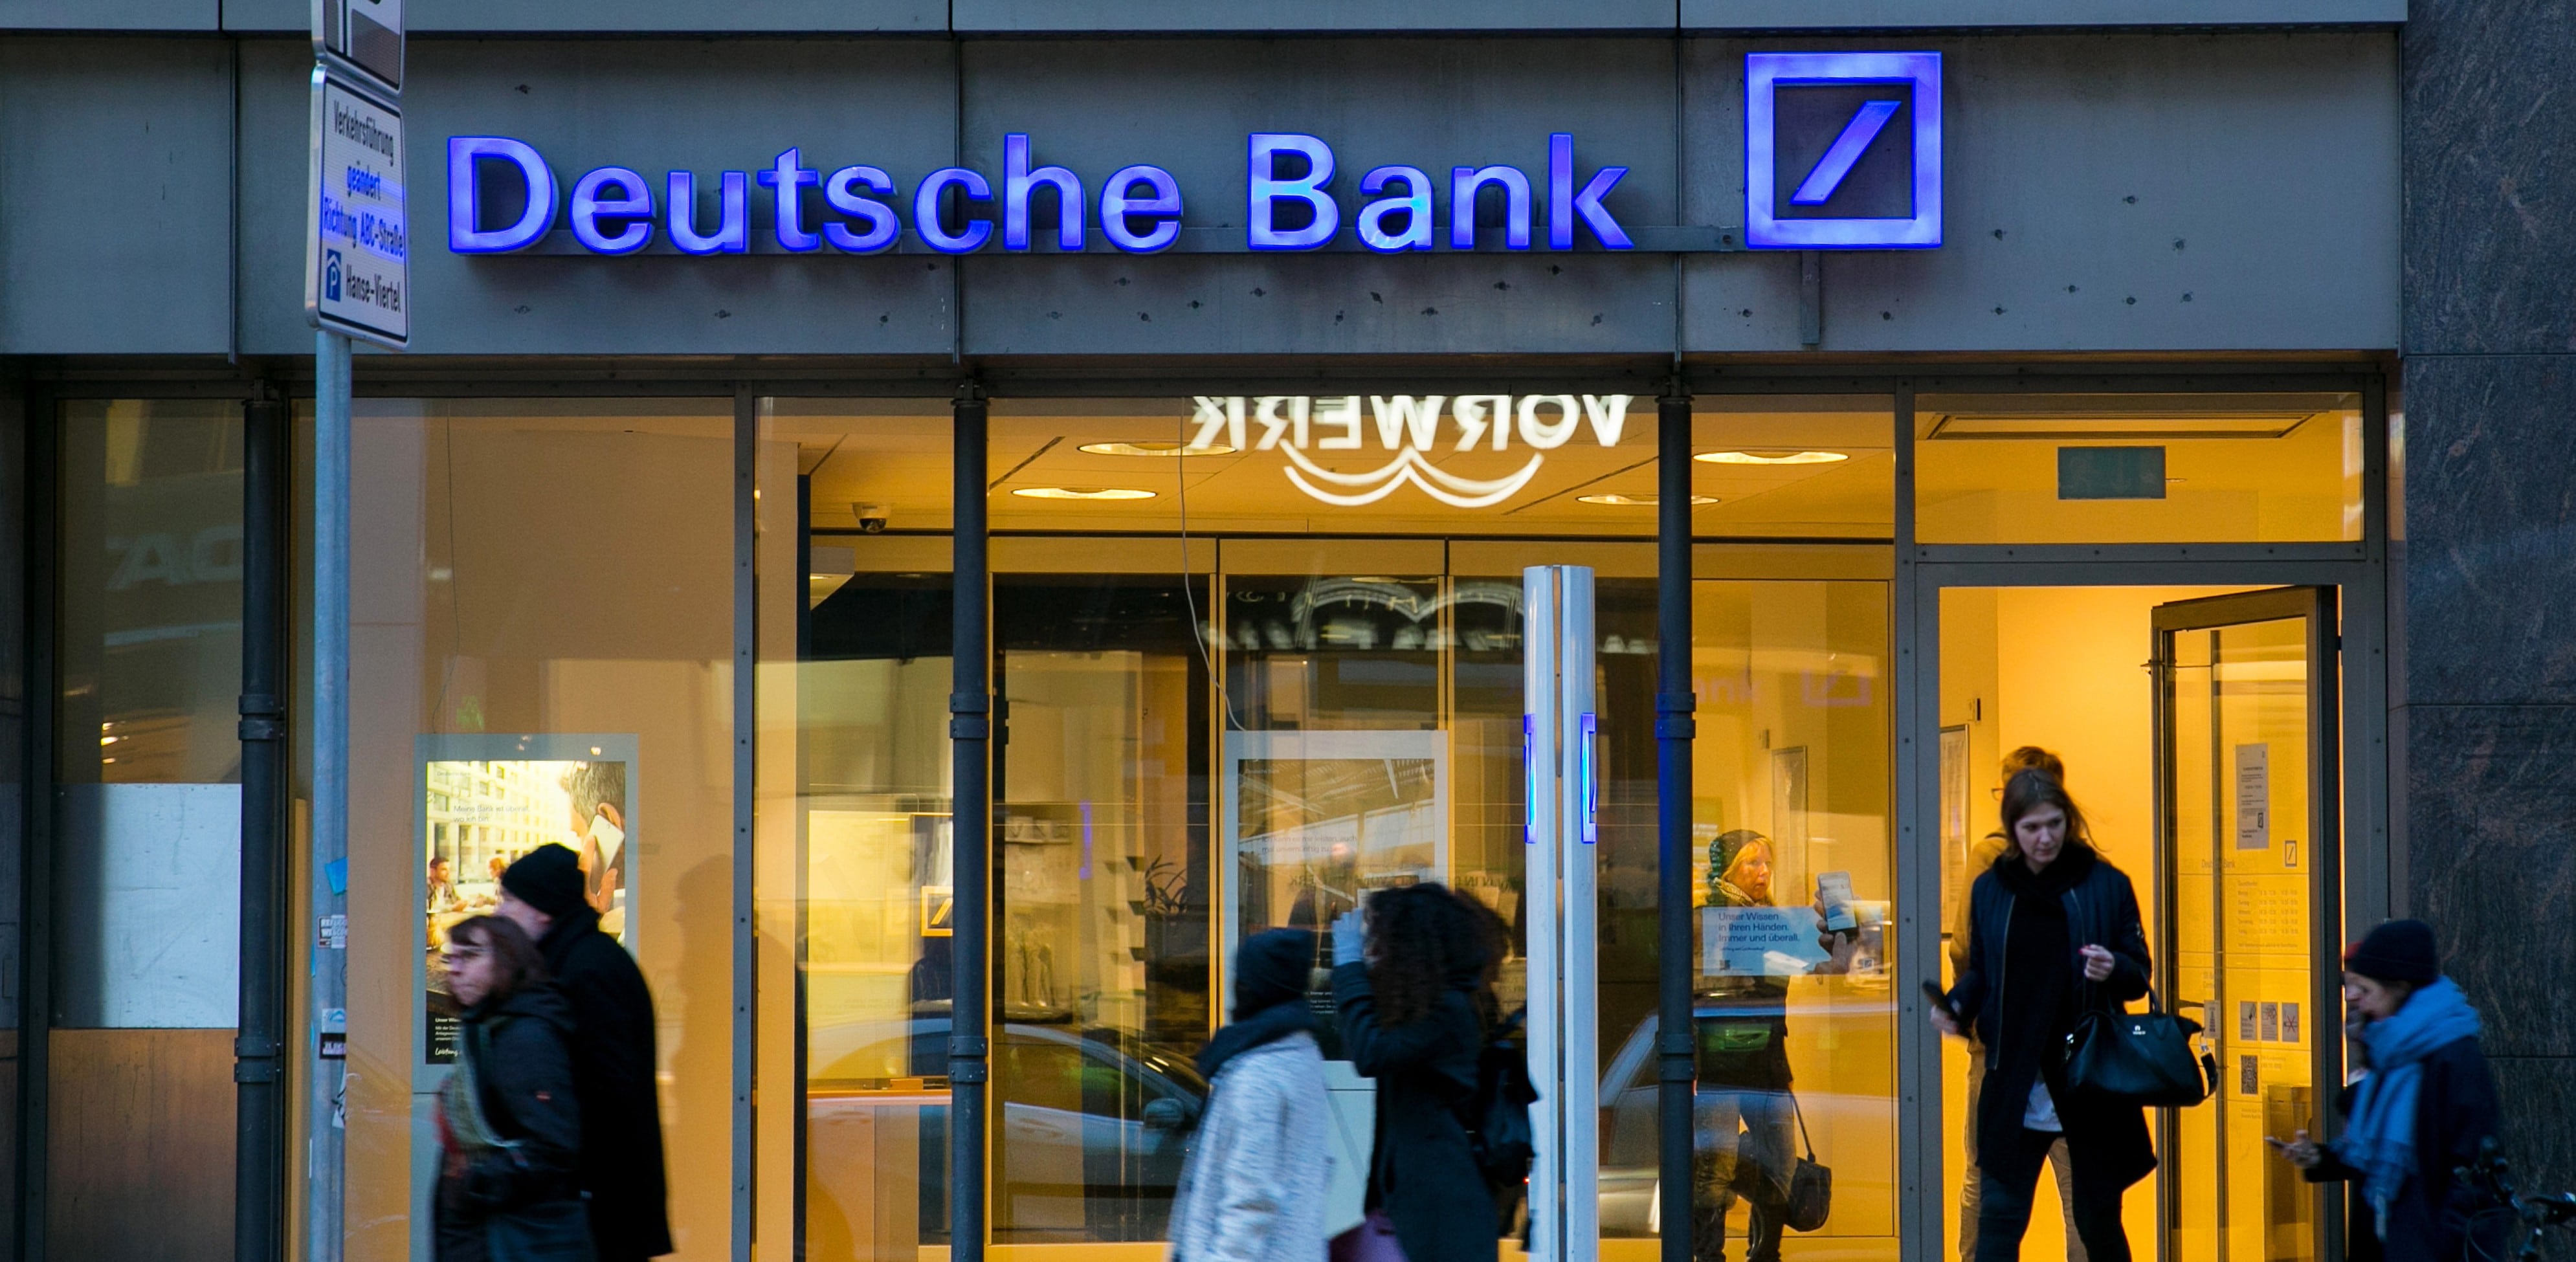 Deutsche Bank CEO Sees Cause for Commerzbank Merger, Source Says